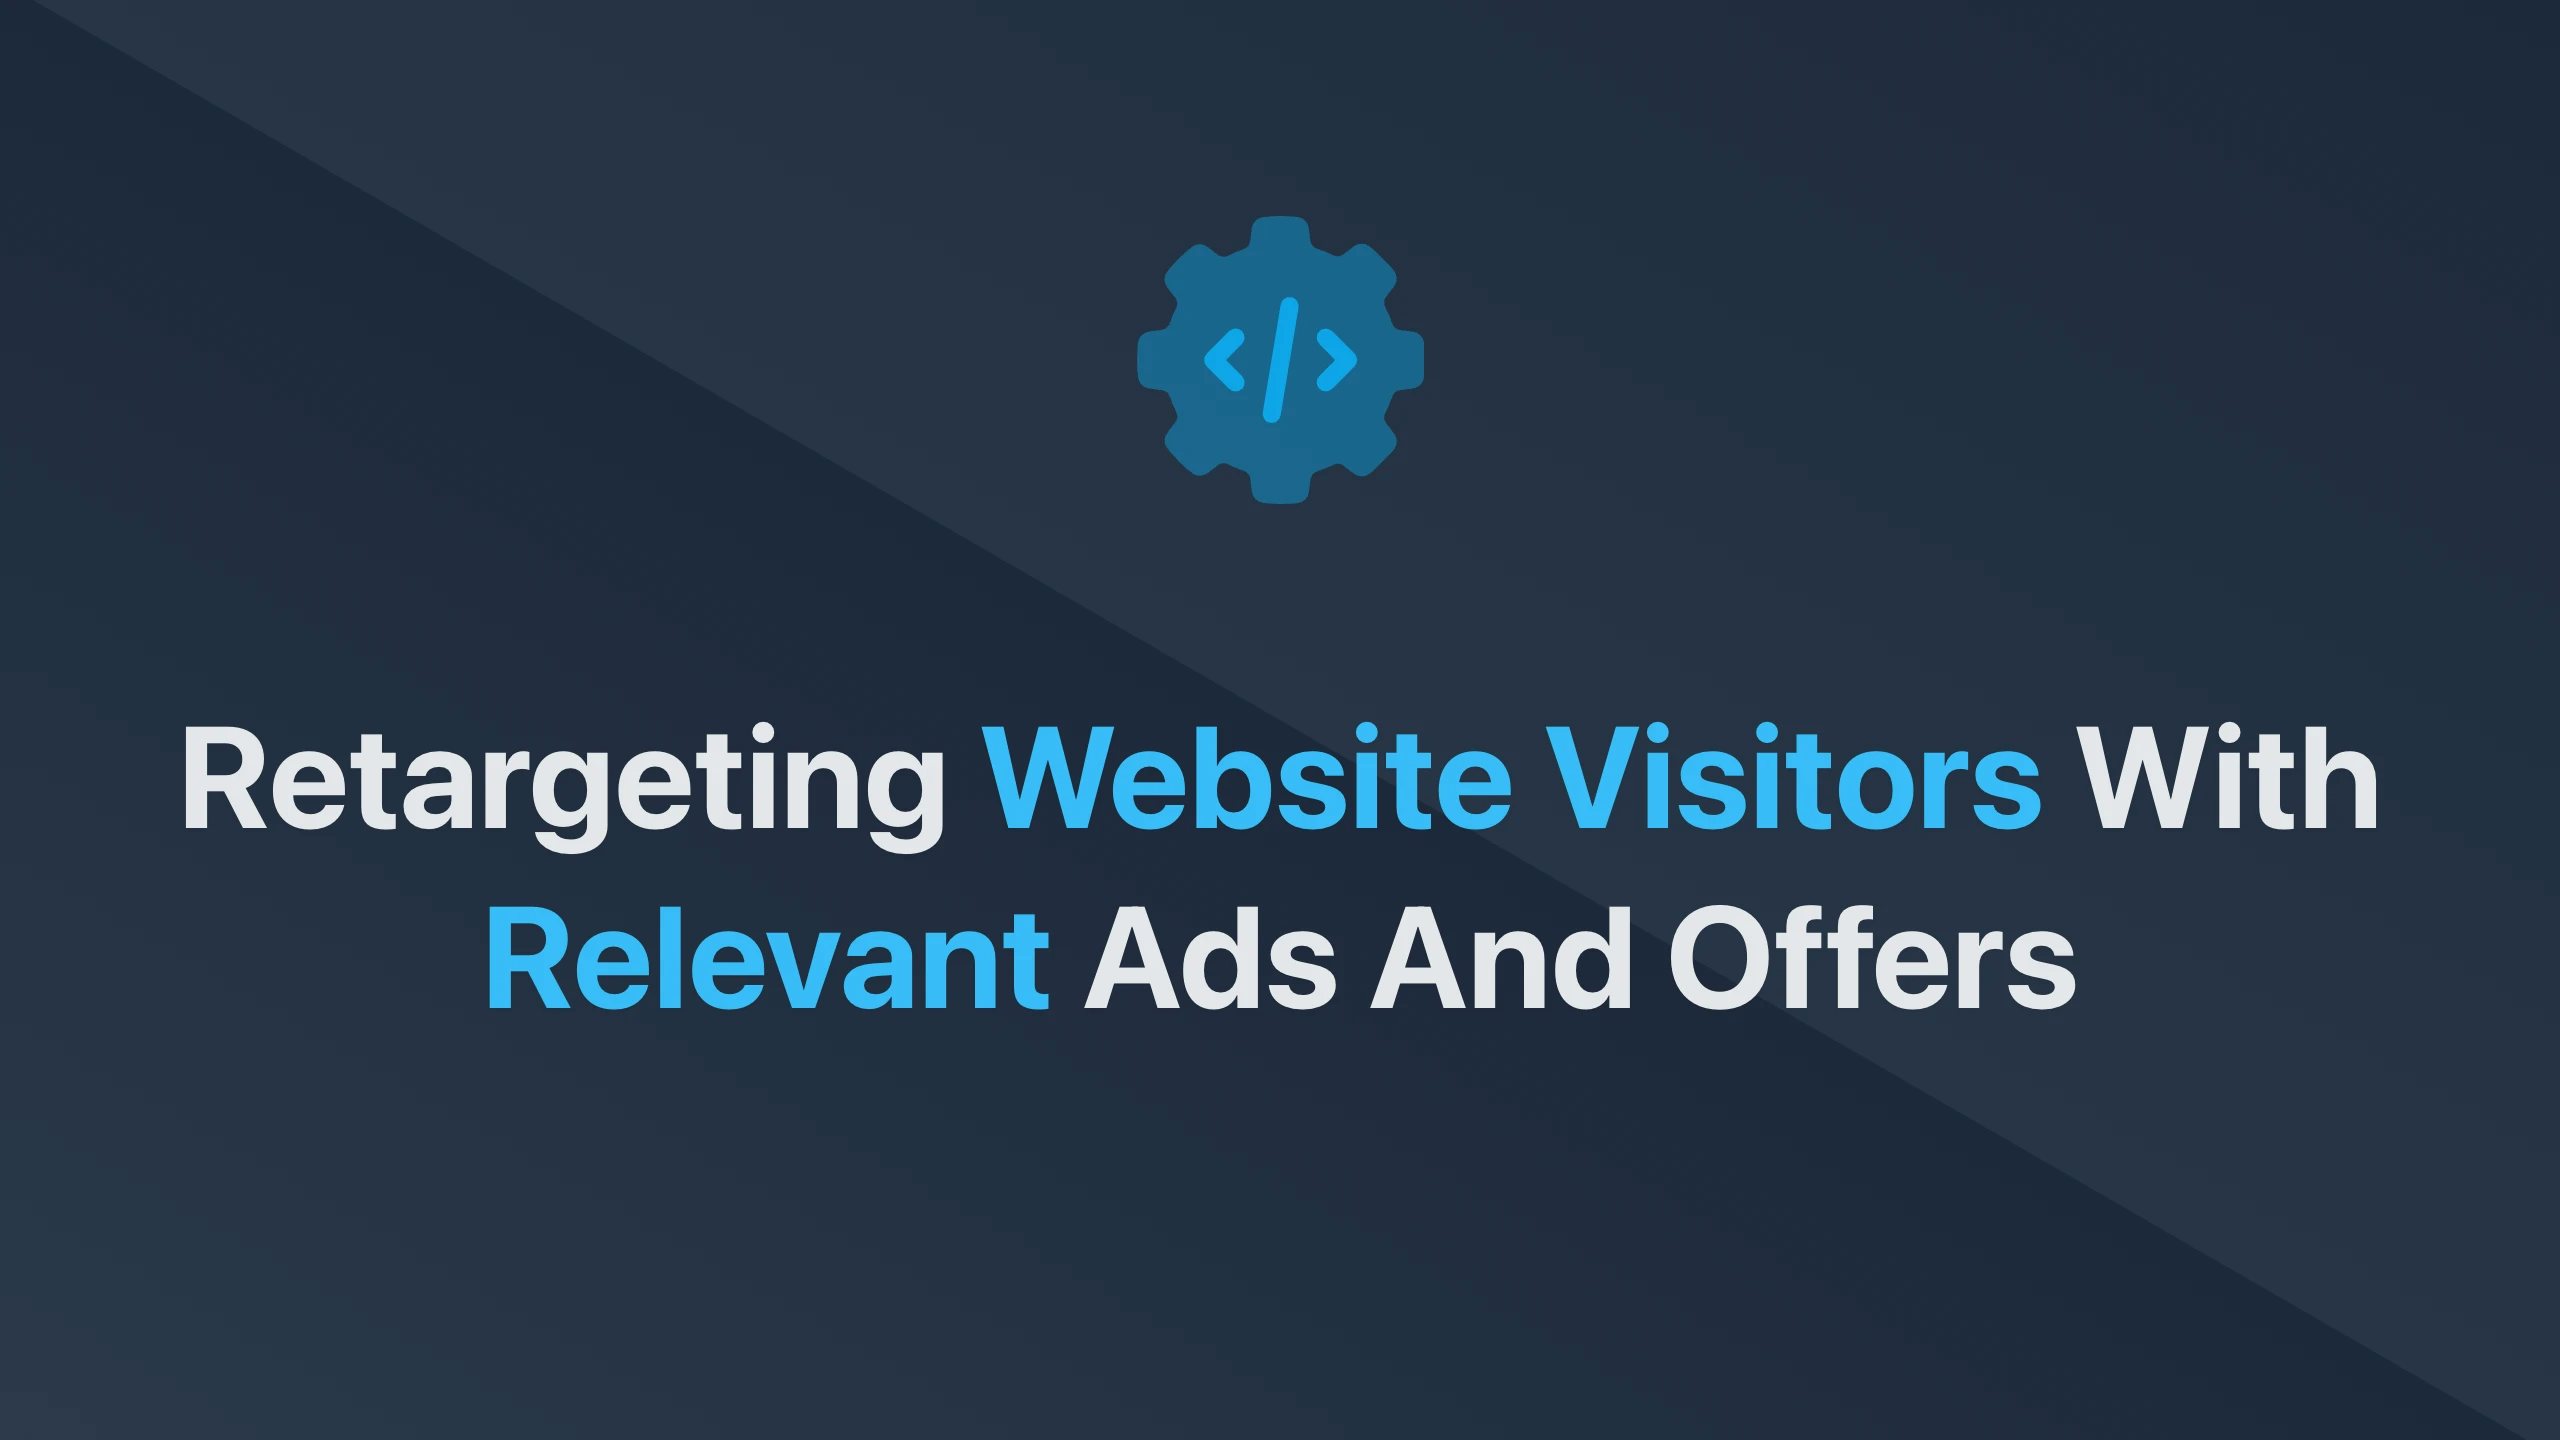 Cover Image for Retargeting Website Visitors with Relevant Ads and Offers